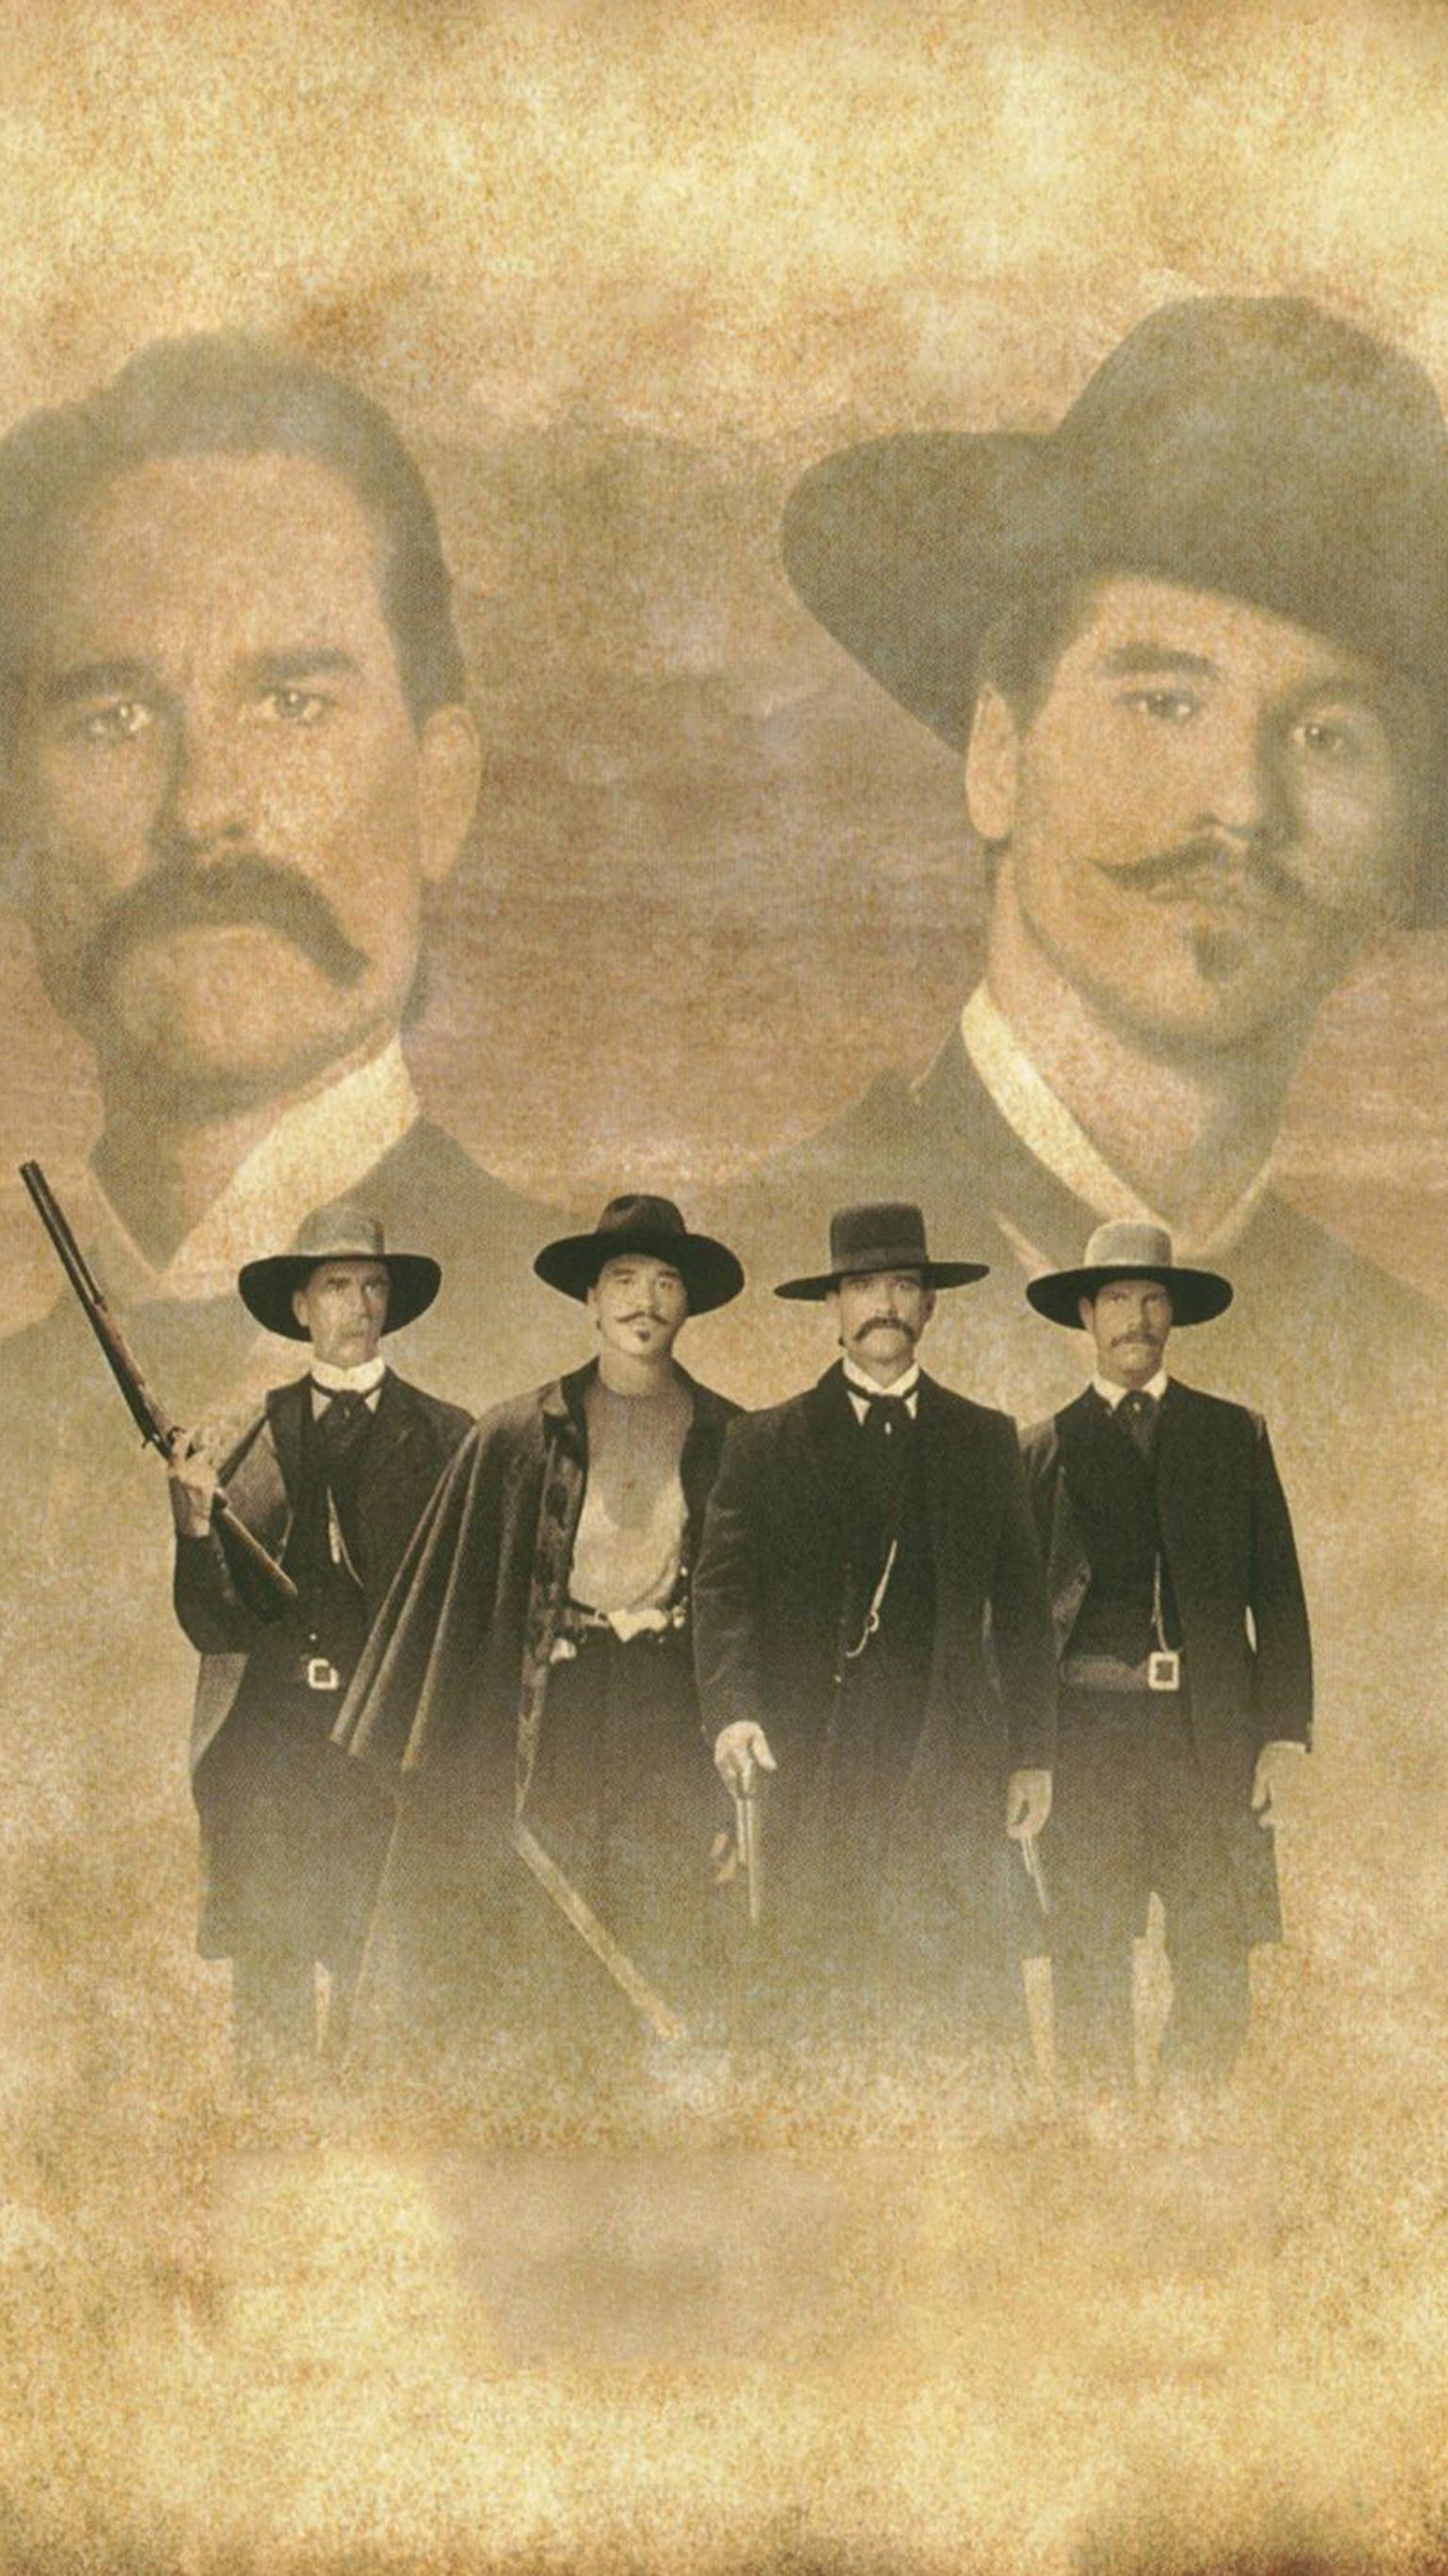 Doc Holliday Wood Prints and Doc Holliday Wood Art for Sale  Pixels